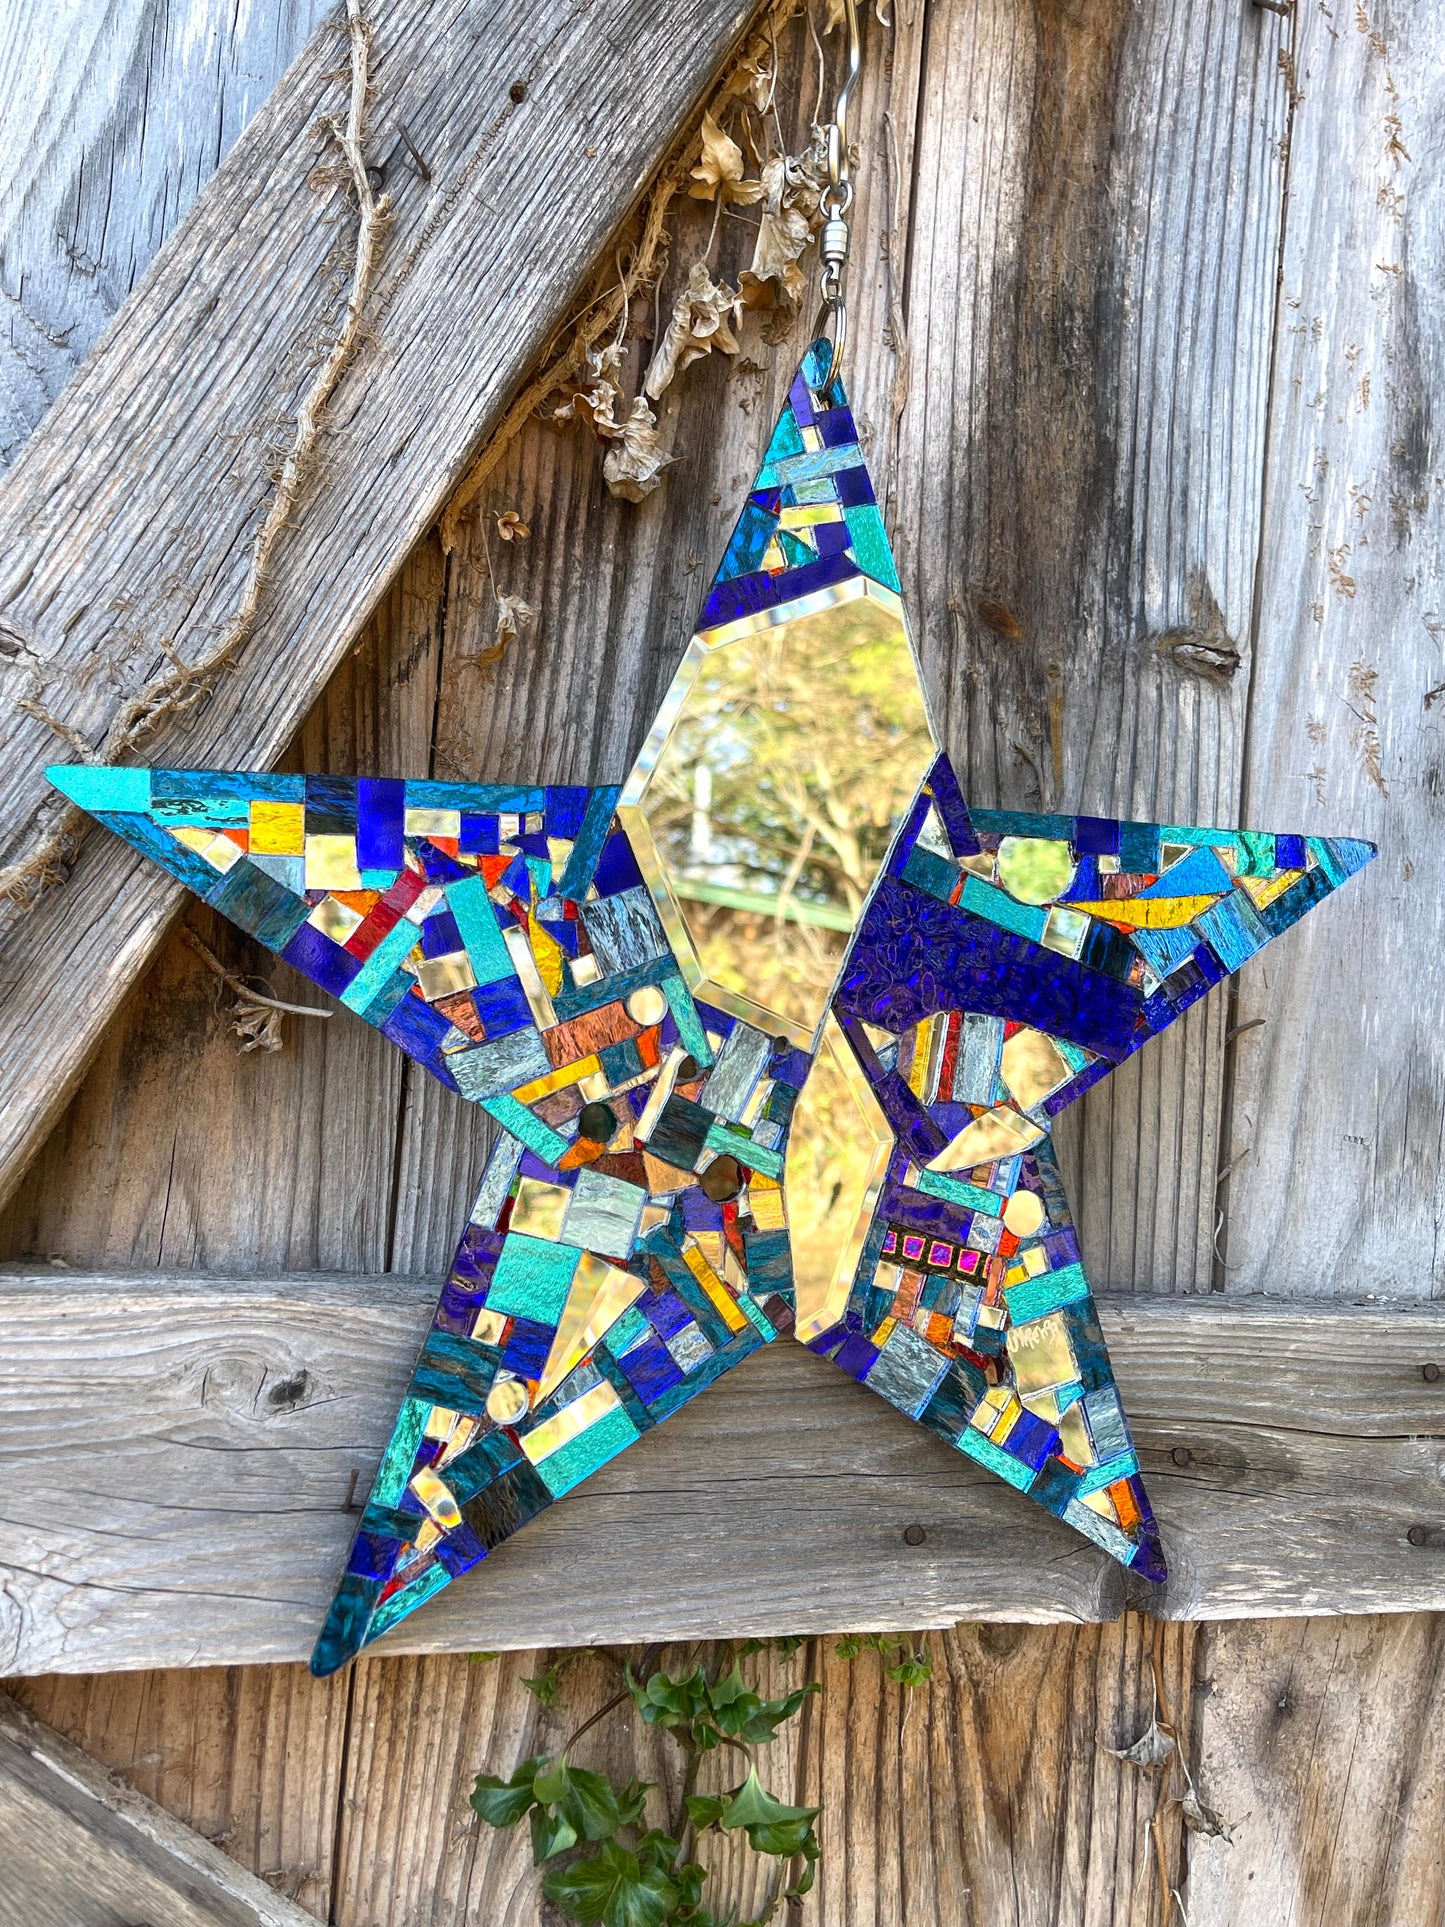 Beautiful Large Mirror Mosaic Star, Gold on One Side, Blue on the Other